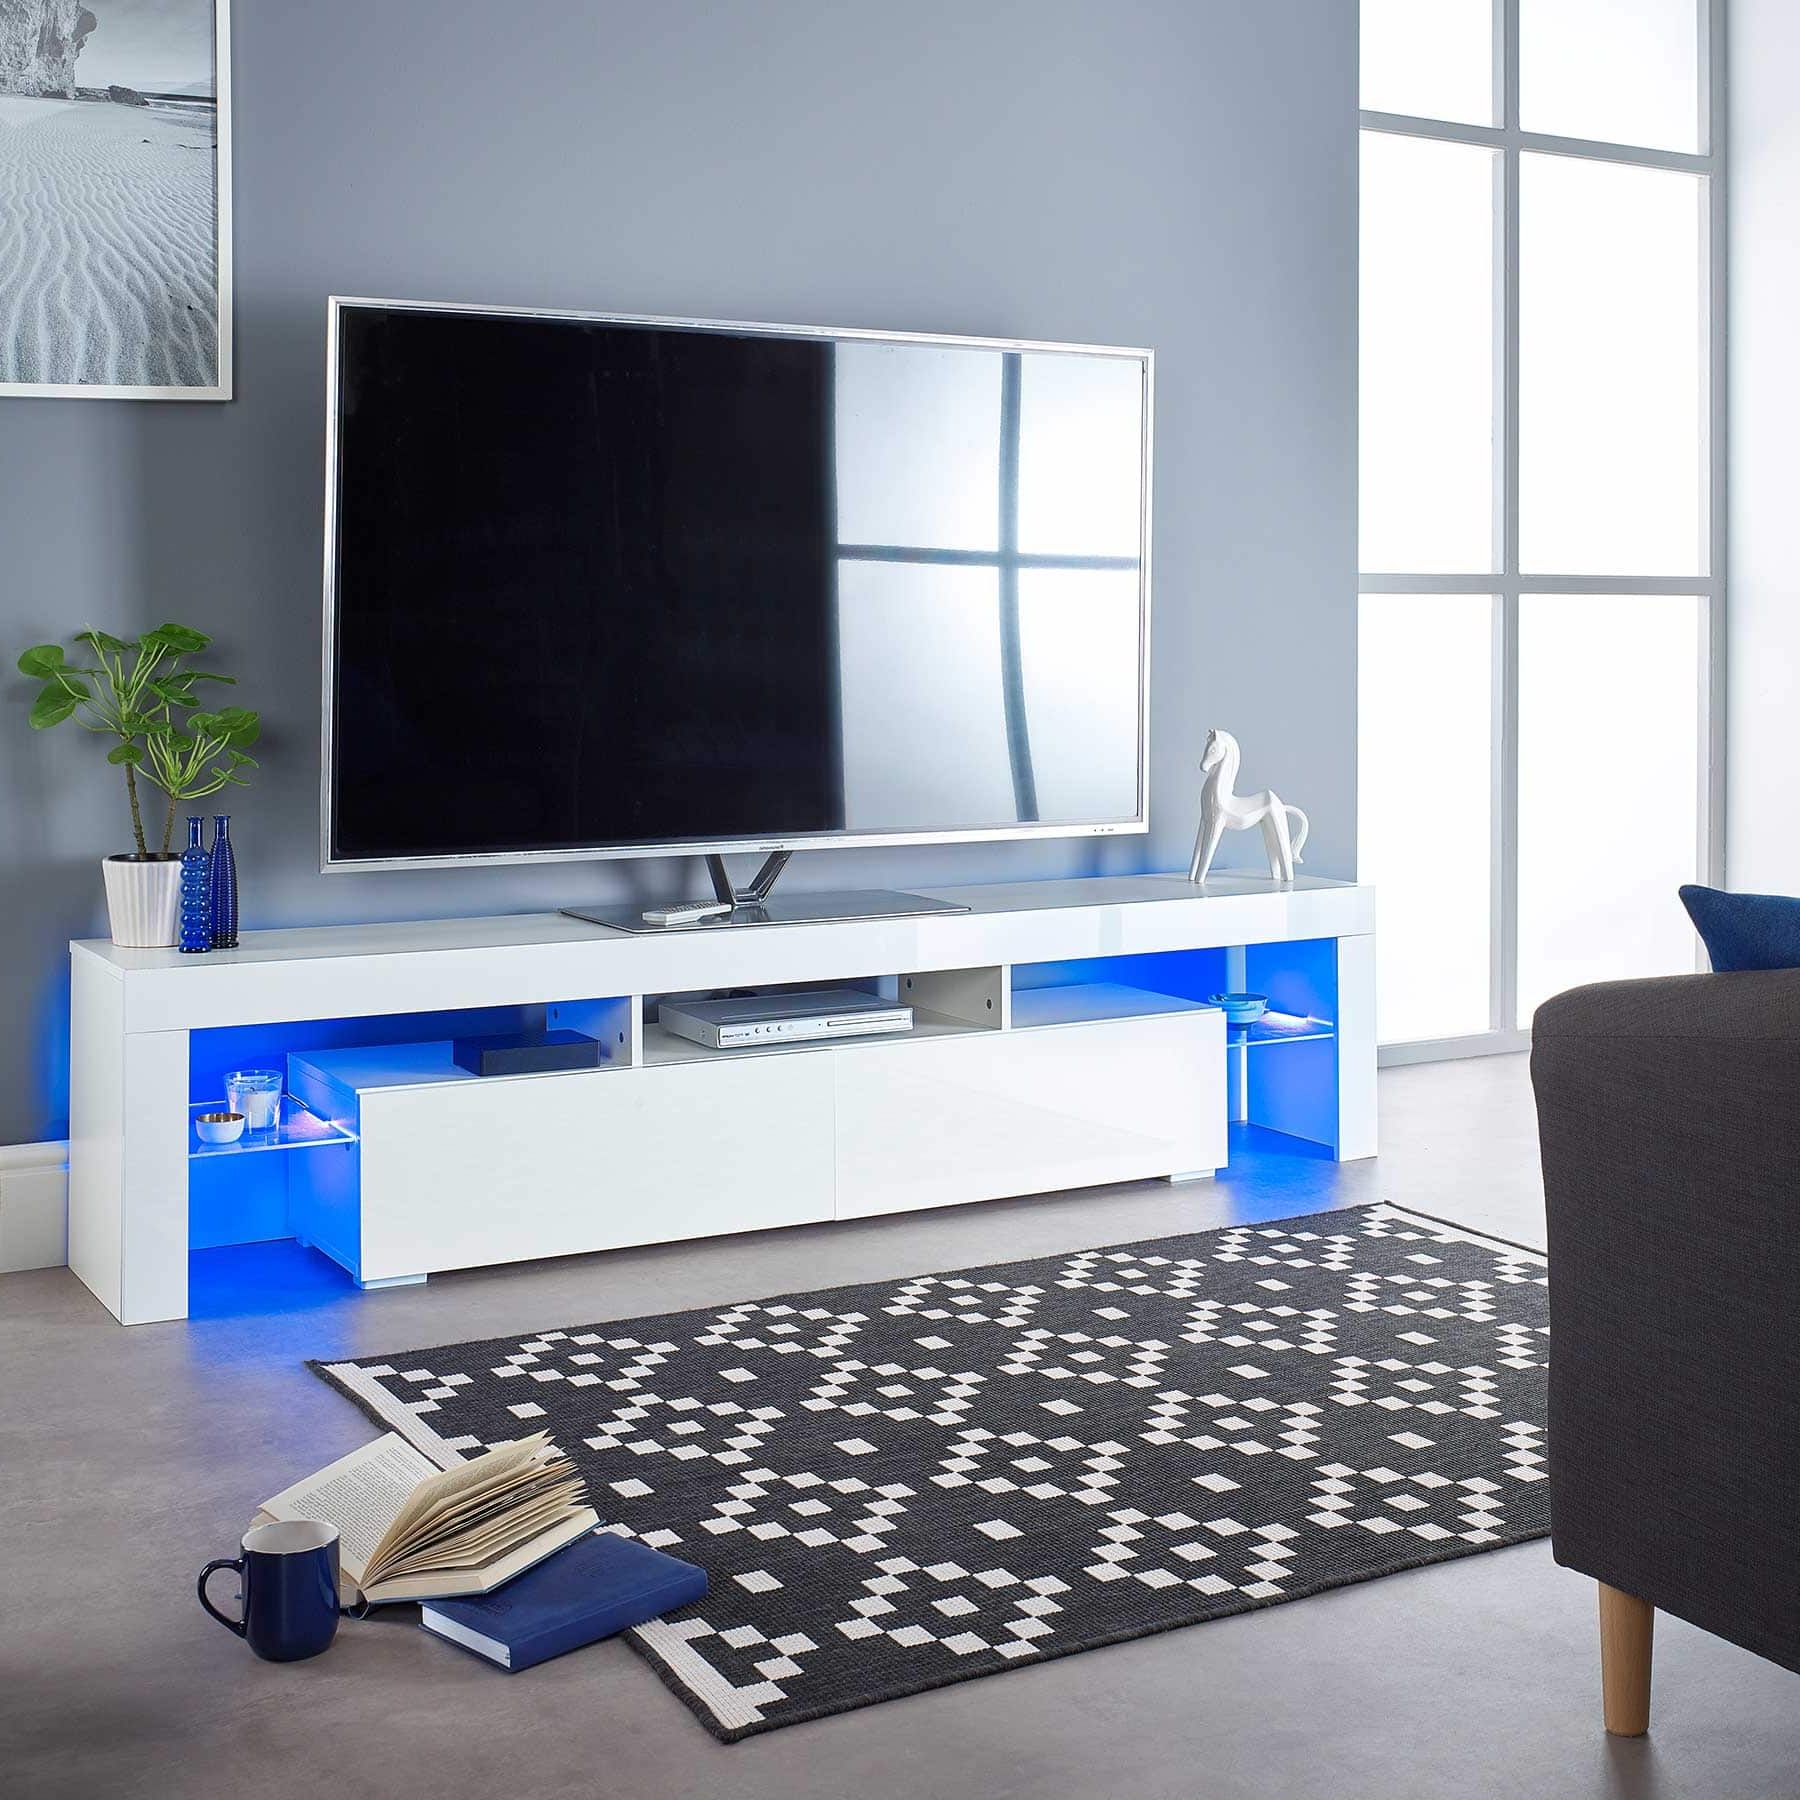 Ts1704 Wide 200cm White Tv Cabinet For Up To 80″ Screens | Mmt Within Bromley White Wide Tv Stands (Gallery 12 of 20)